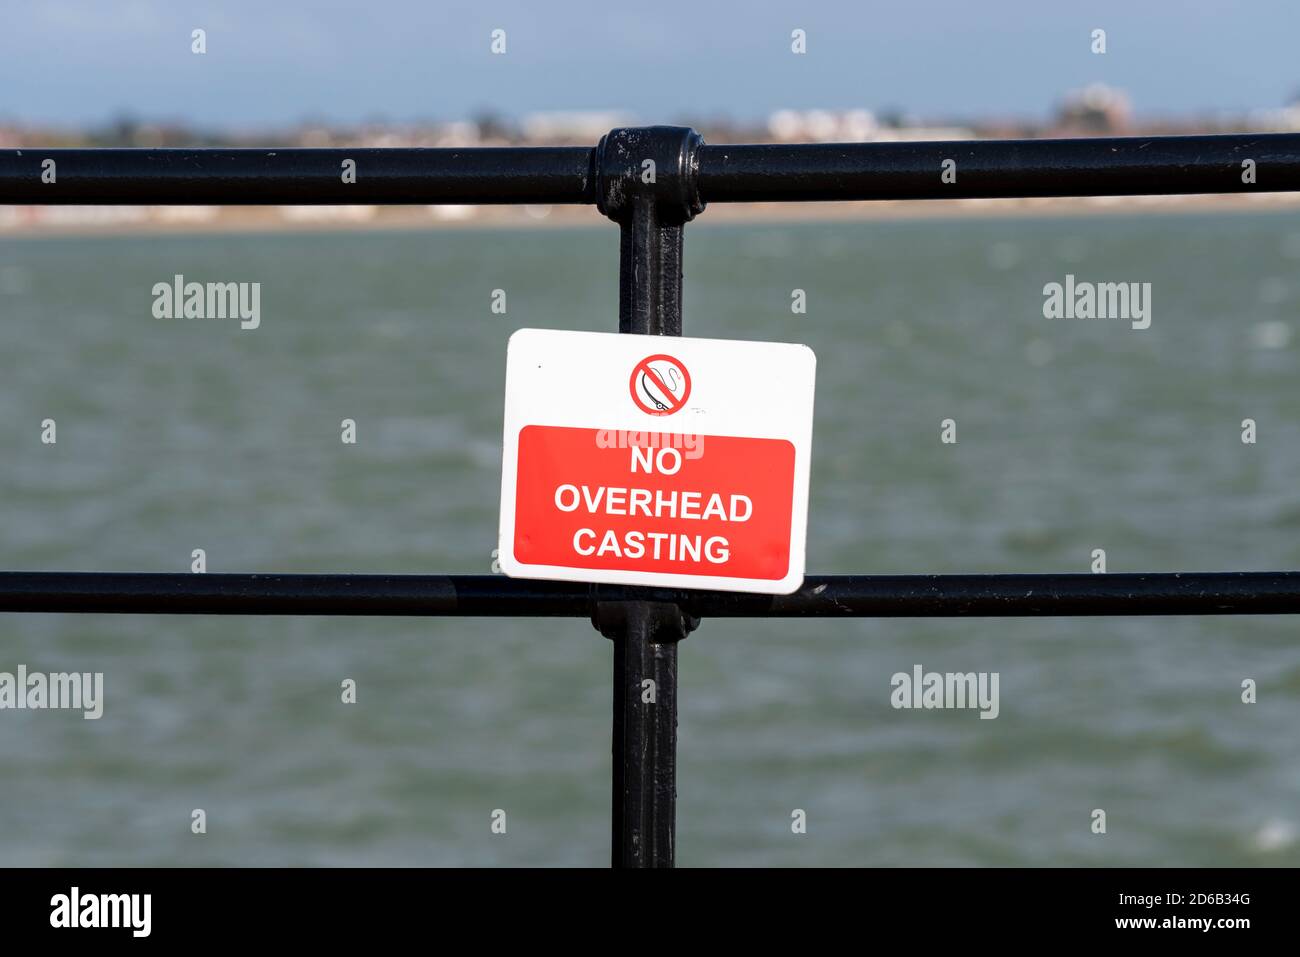 No overhead casting, warning sign, on Southend Pier, for anglers. Fishing from Southend Pier is allowed from limited areas, with safety warnings Stock Photo